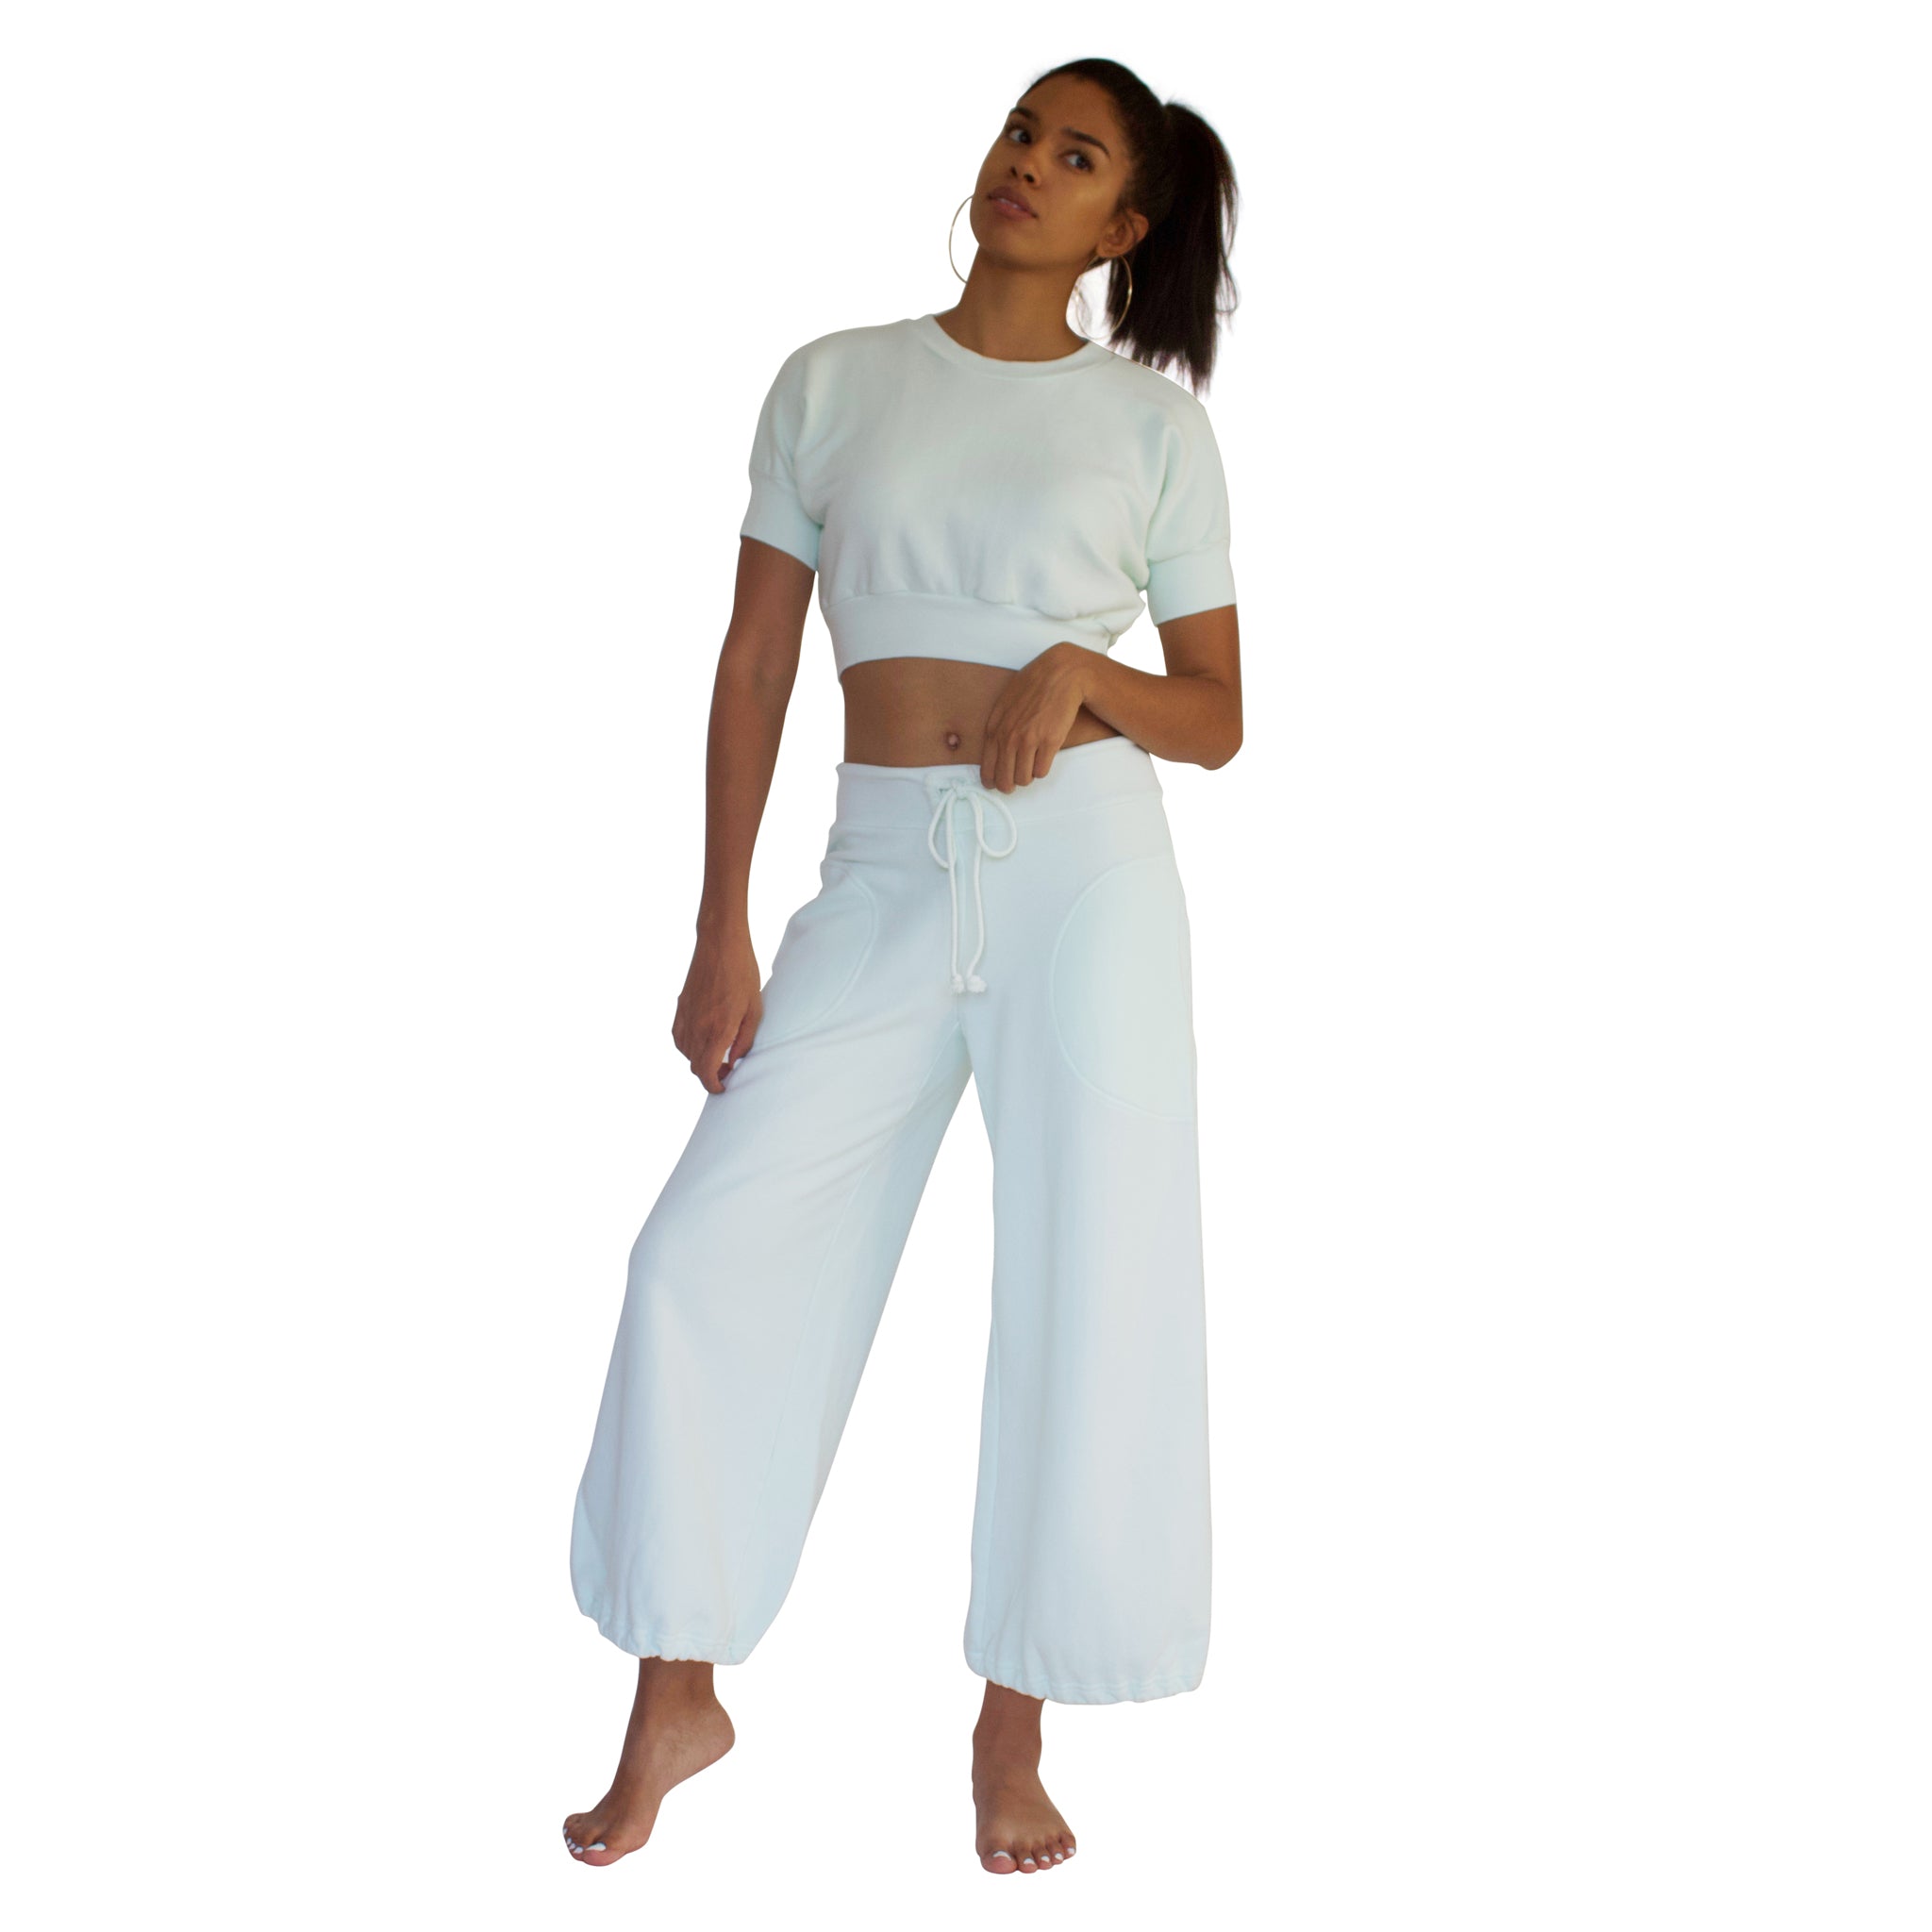 CC Beach Pant in 100% cotton French Terry will keep you comfy and cozy with roomy side seam pockets, drawstring waist, elasticized cuffs shown here in Mint Green.